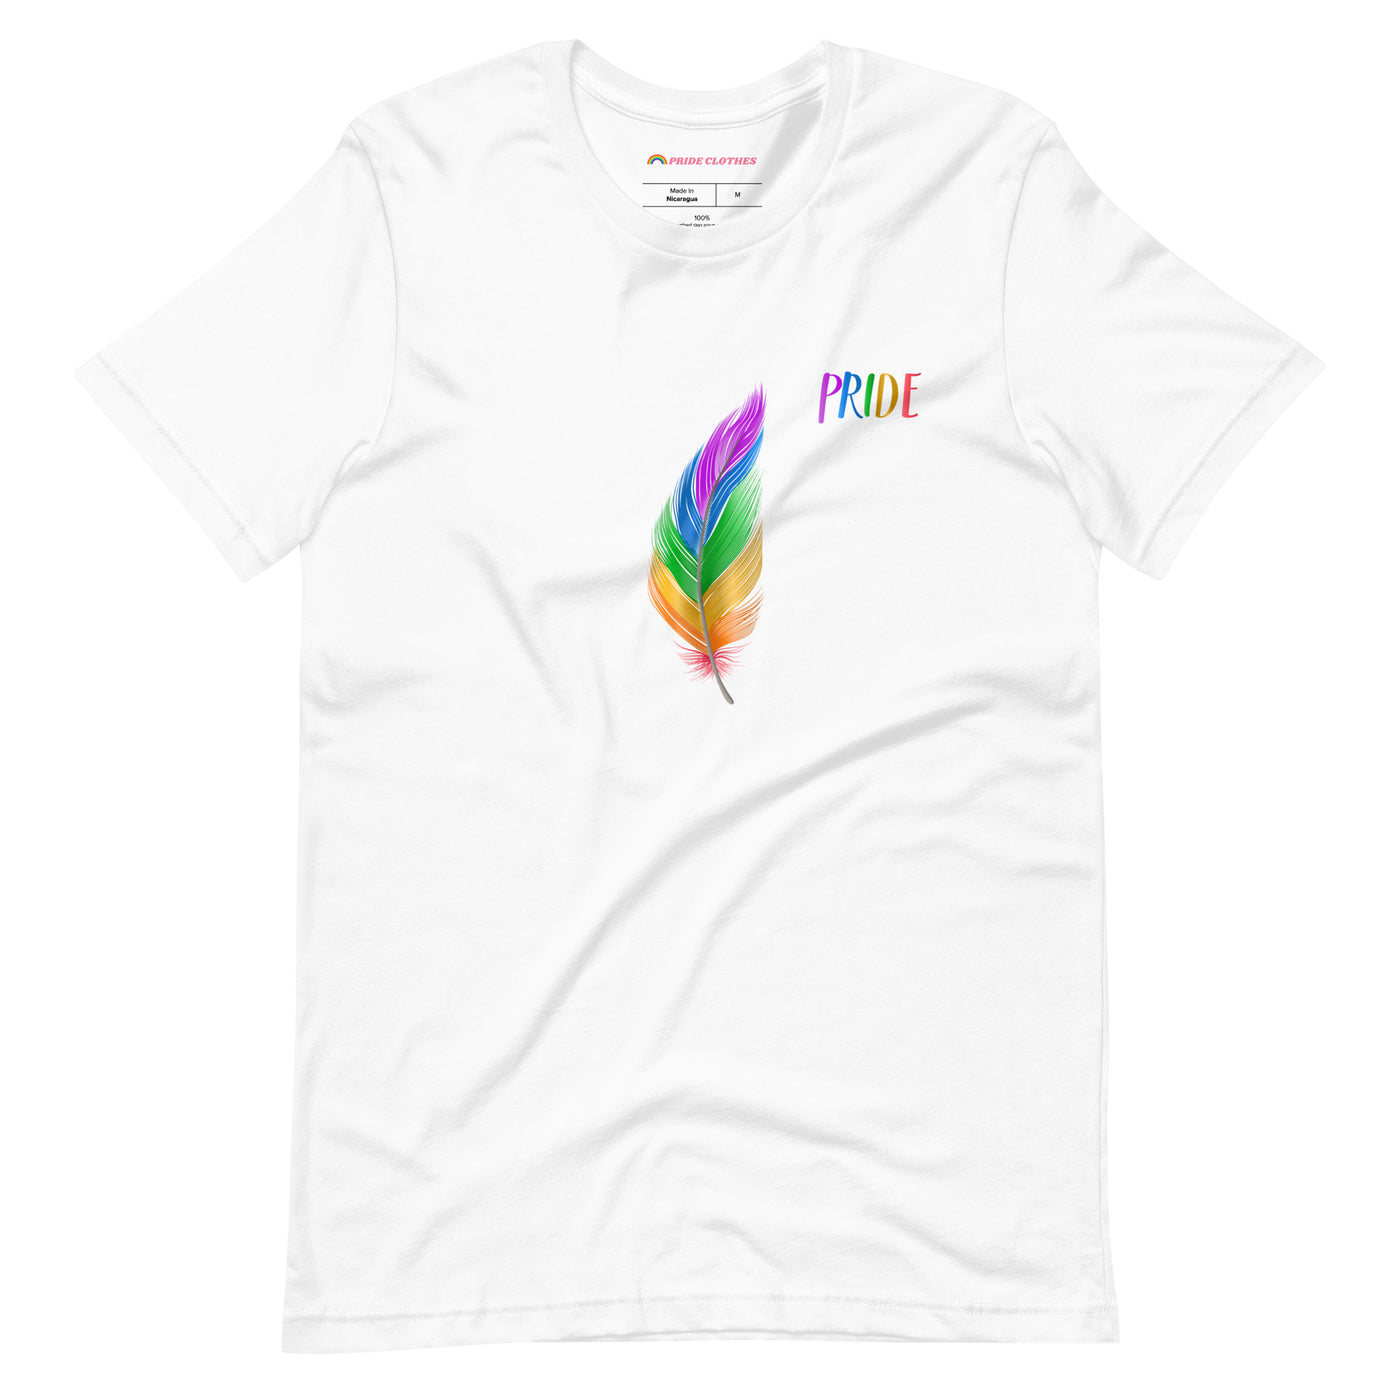 Pride Clothes - A Pride Feather Shirt That Can Make You Look and Feel Your Best - White